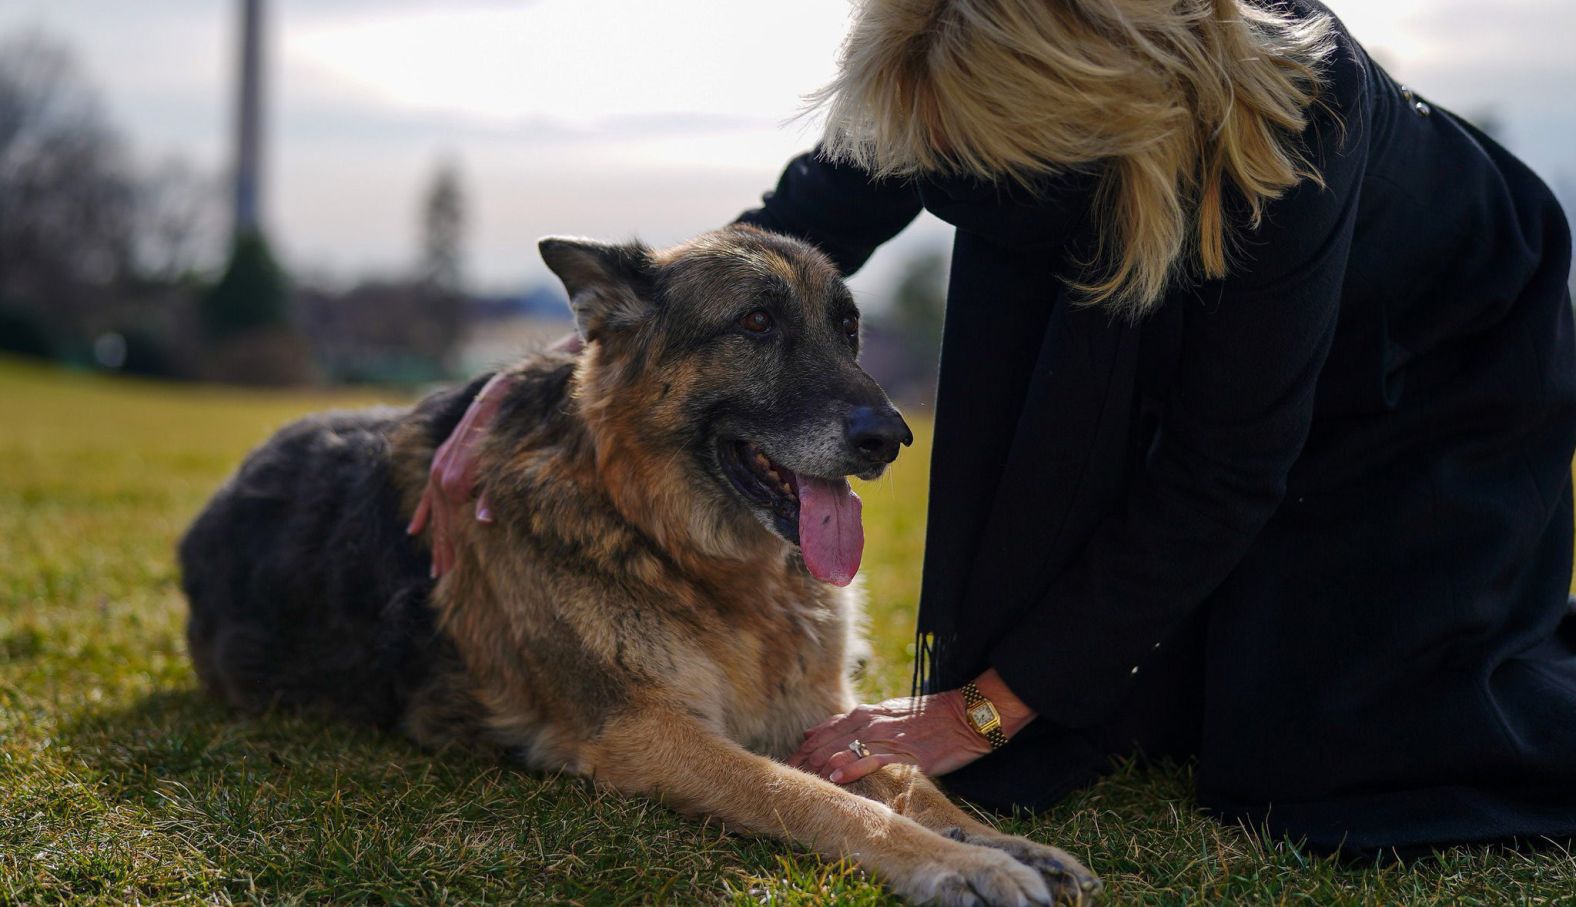 Champ was one of the Biden family's German shepherds. <a href="index.php?page=&url=https%3A%2F%2Fwww.cnn.com%2F2021%2F06%2F19%2Fpolitics%2Fchamp-biden-german-shepherd-dog-dies%2Findex.html" target="_blank">He died in June 2021</a> at the age of 13.